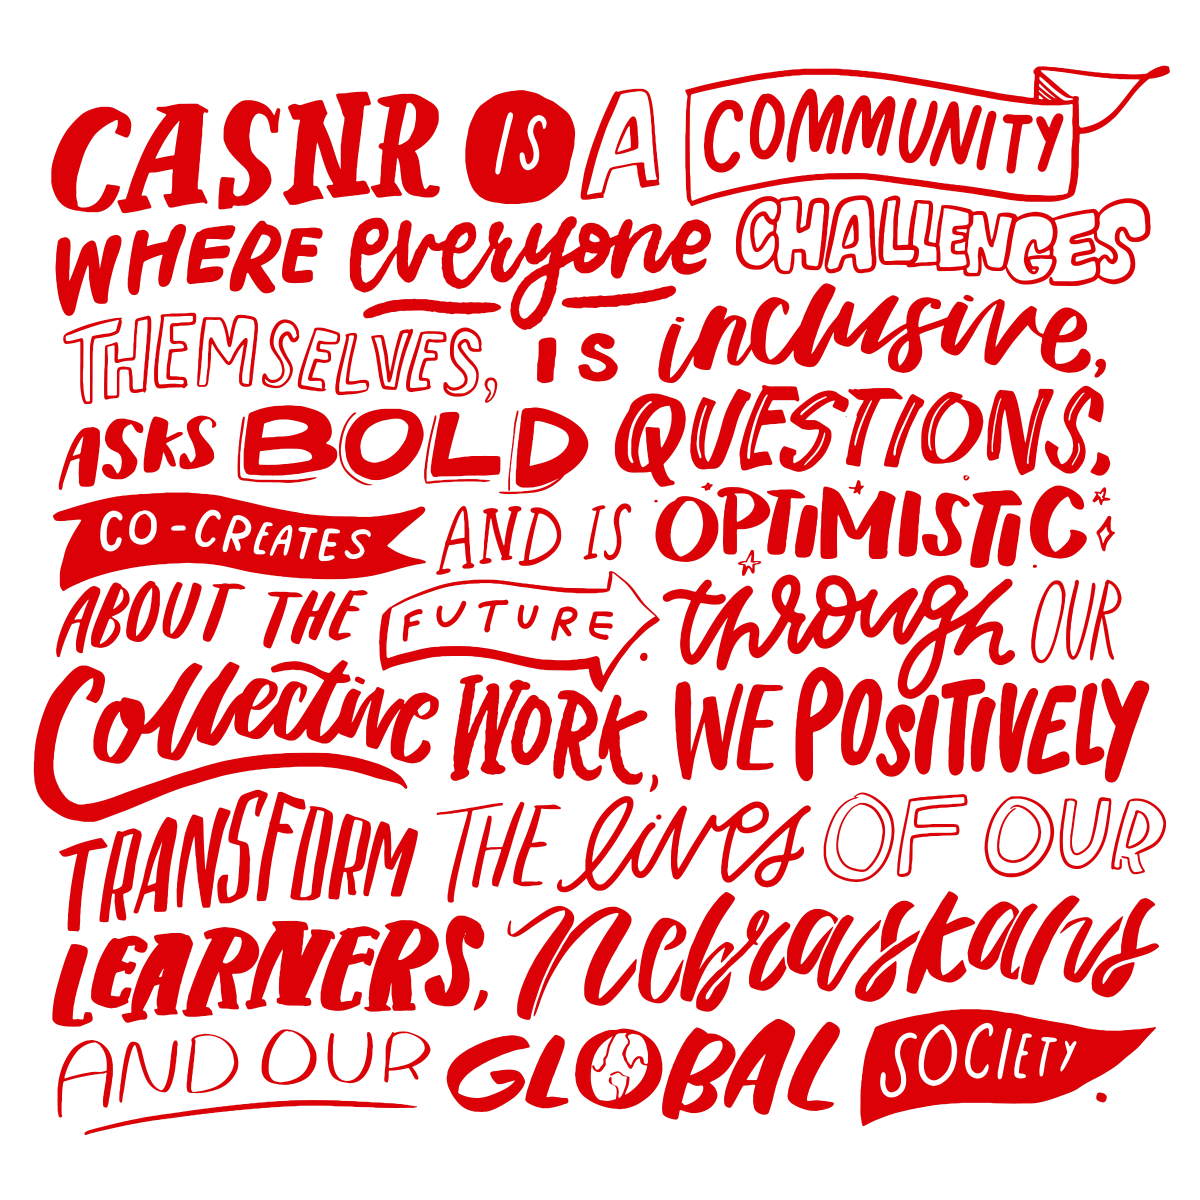 CASNR is a community where everyone challenges themselves, is inclusive, asks bold questions, co-creates and is optimistic about the future. Through our collective work, we positively transform the lives of our leaders, Nebraskans and our global society.